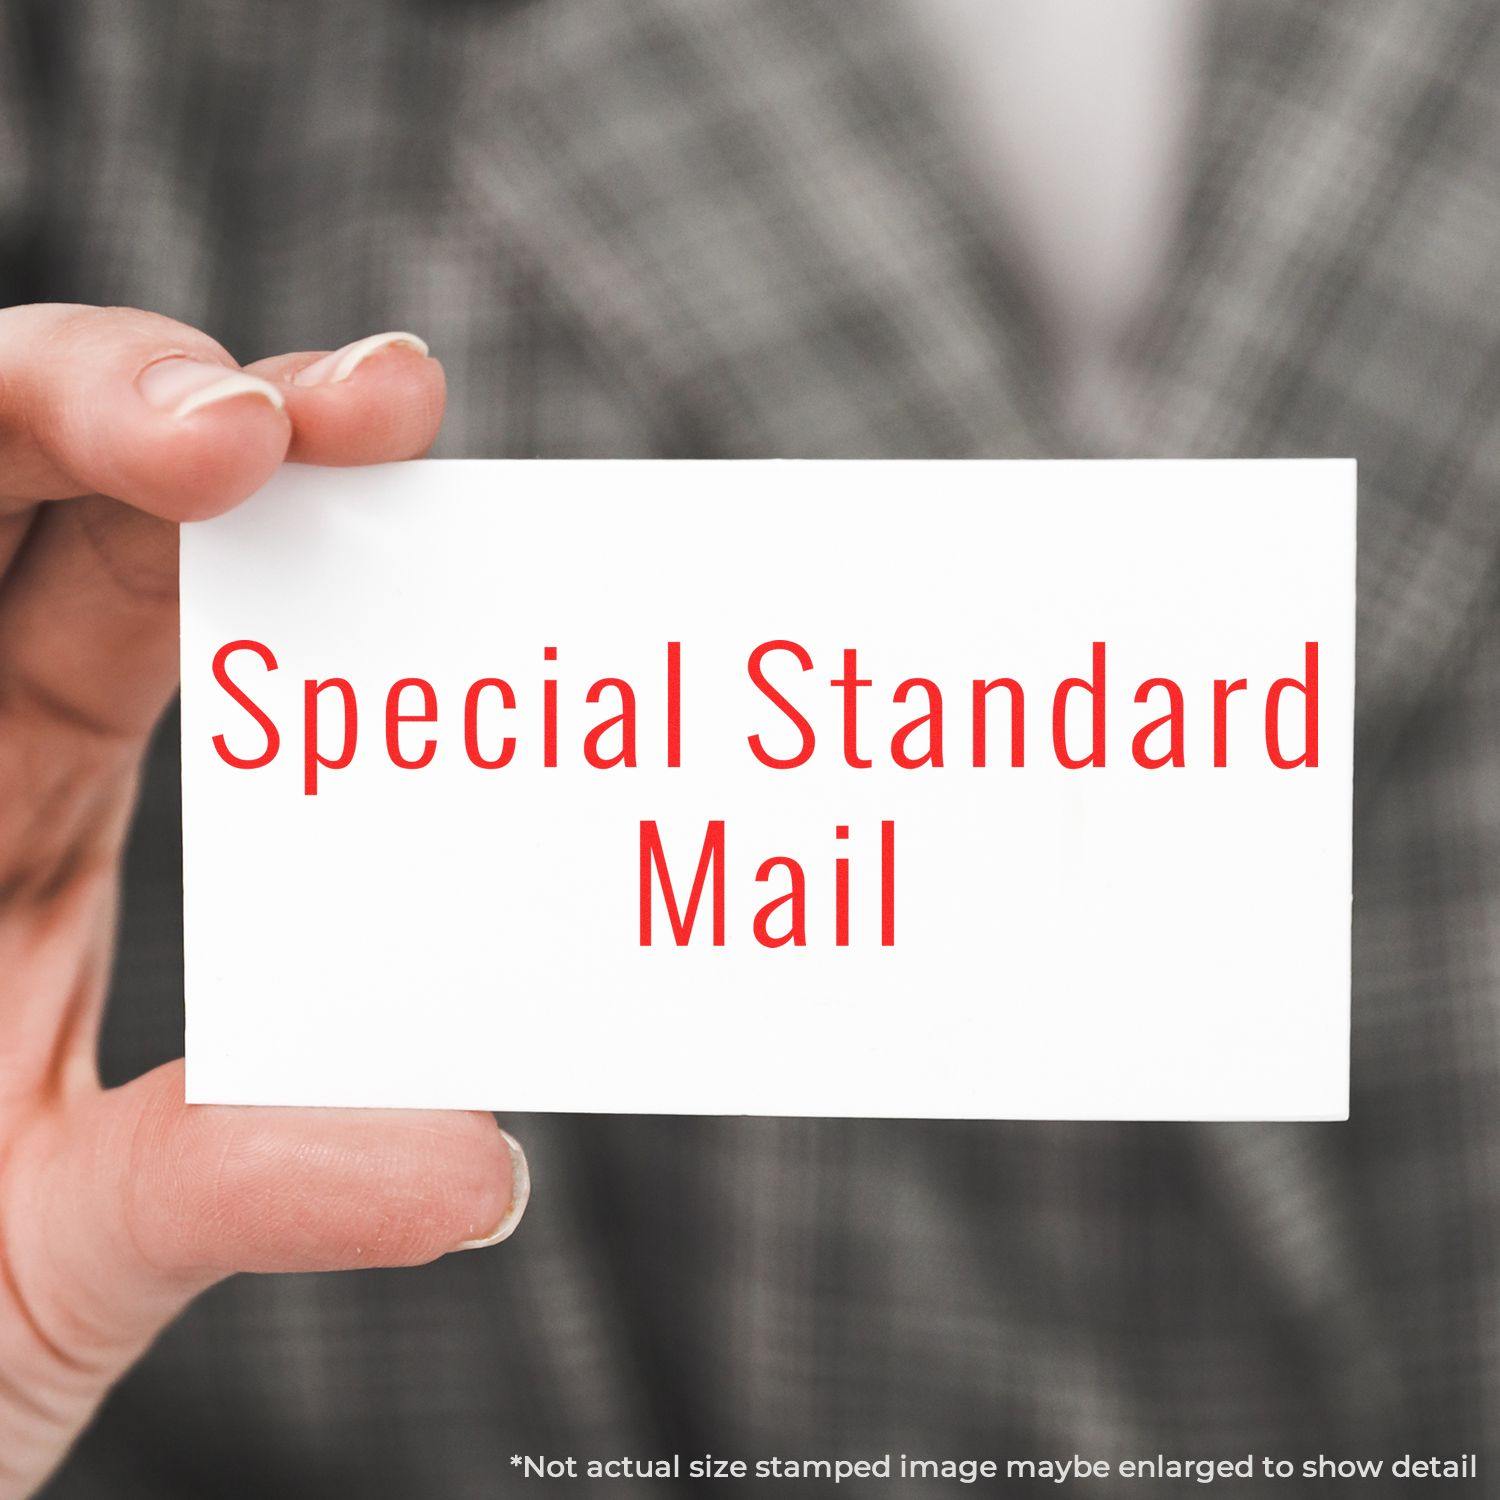 A self-inking stamp with a stamped image showing how the text "Special Standard Mail" is displayed after stamping.